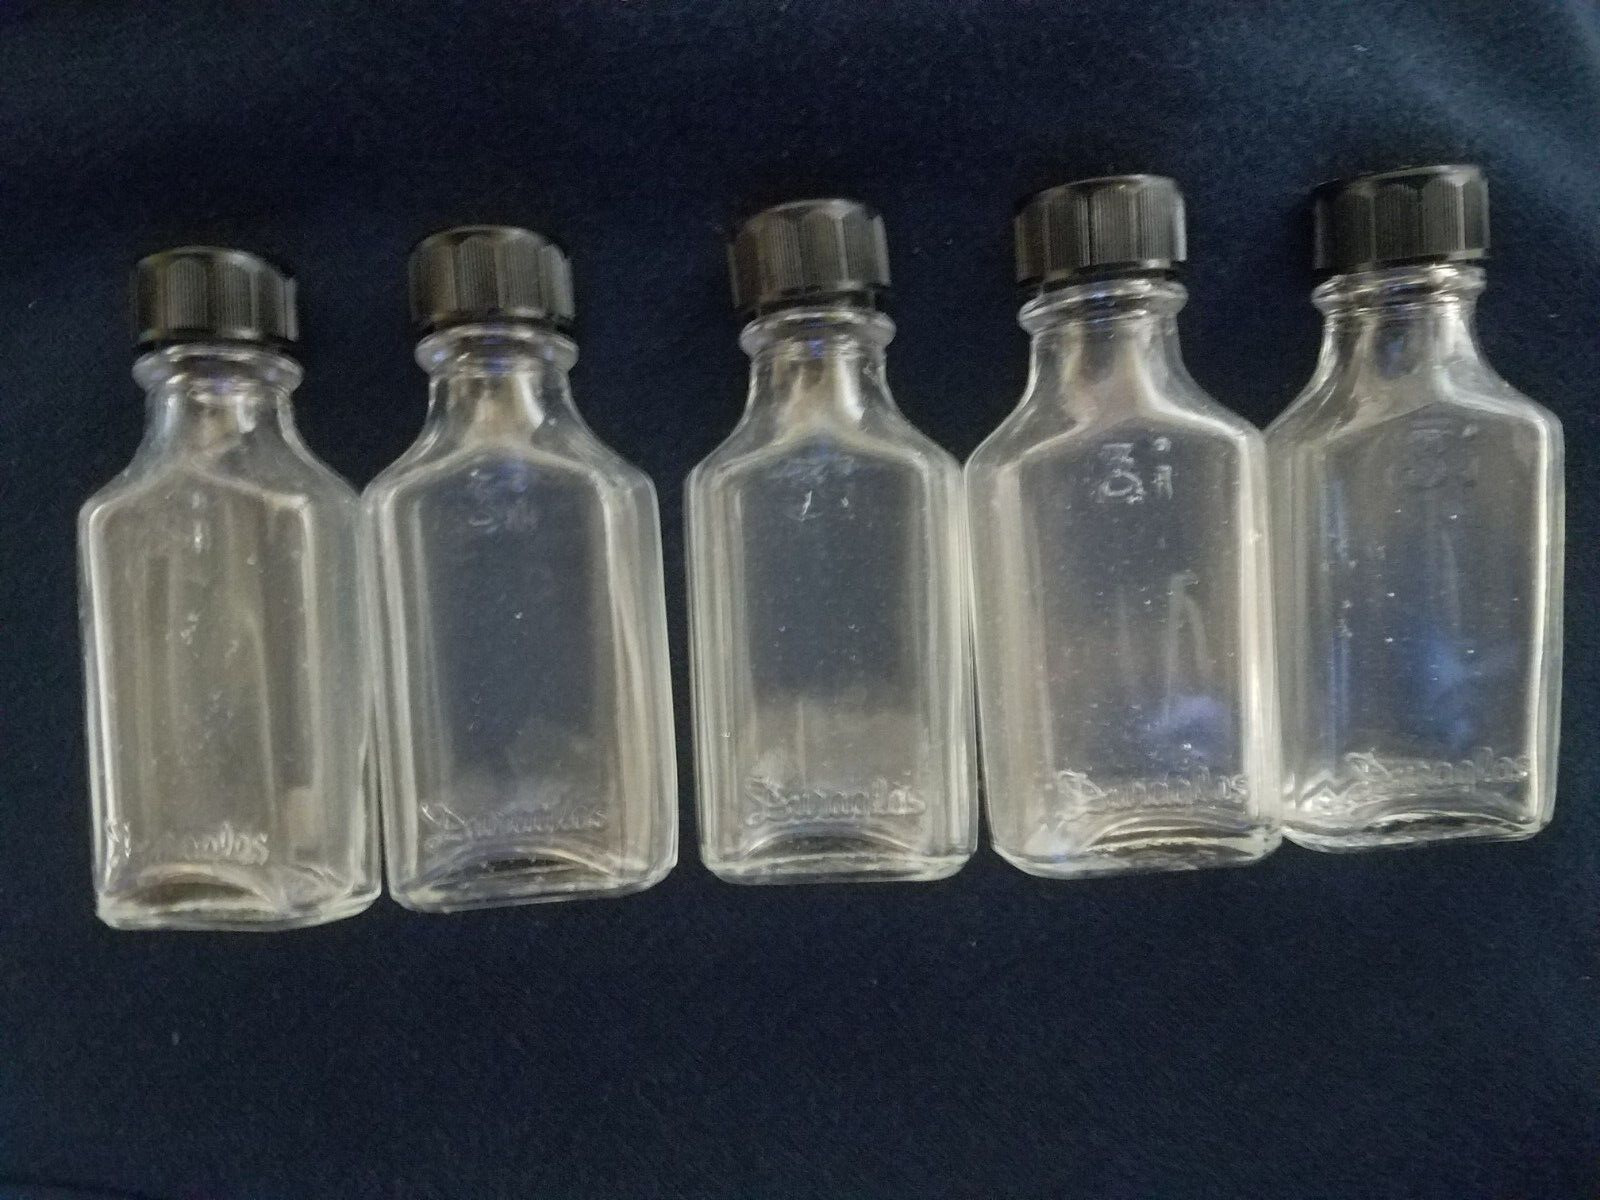 Vintage Duraglas 3i Clear 1 ounce Bottle with Black Cap OWENS Lot of 5